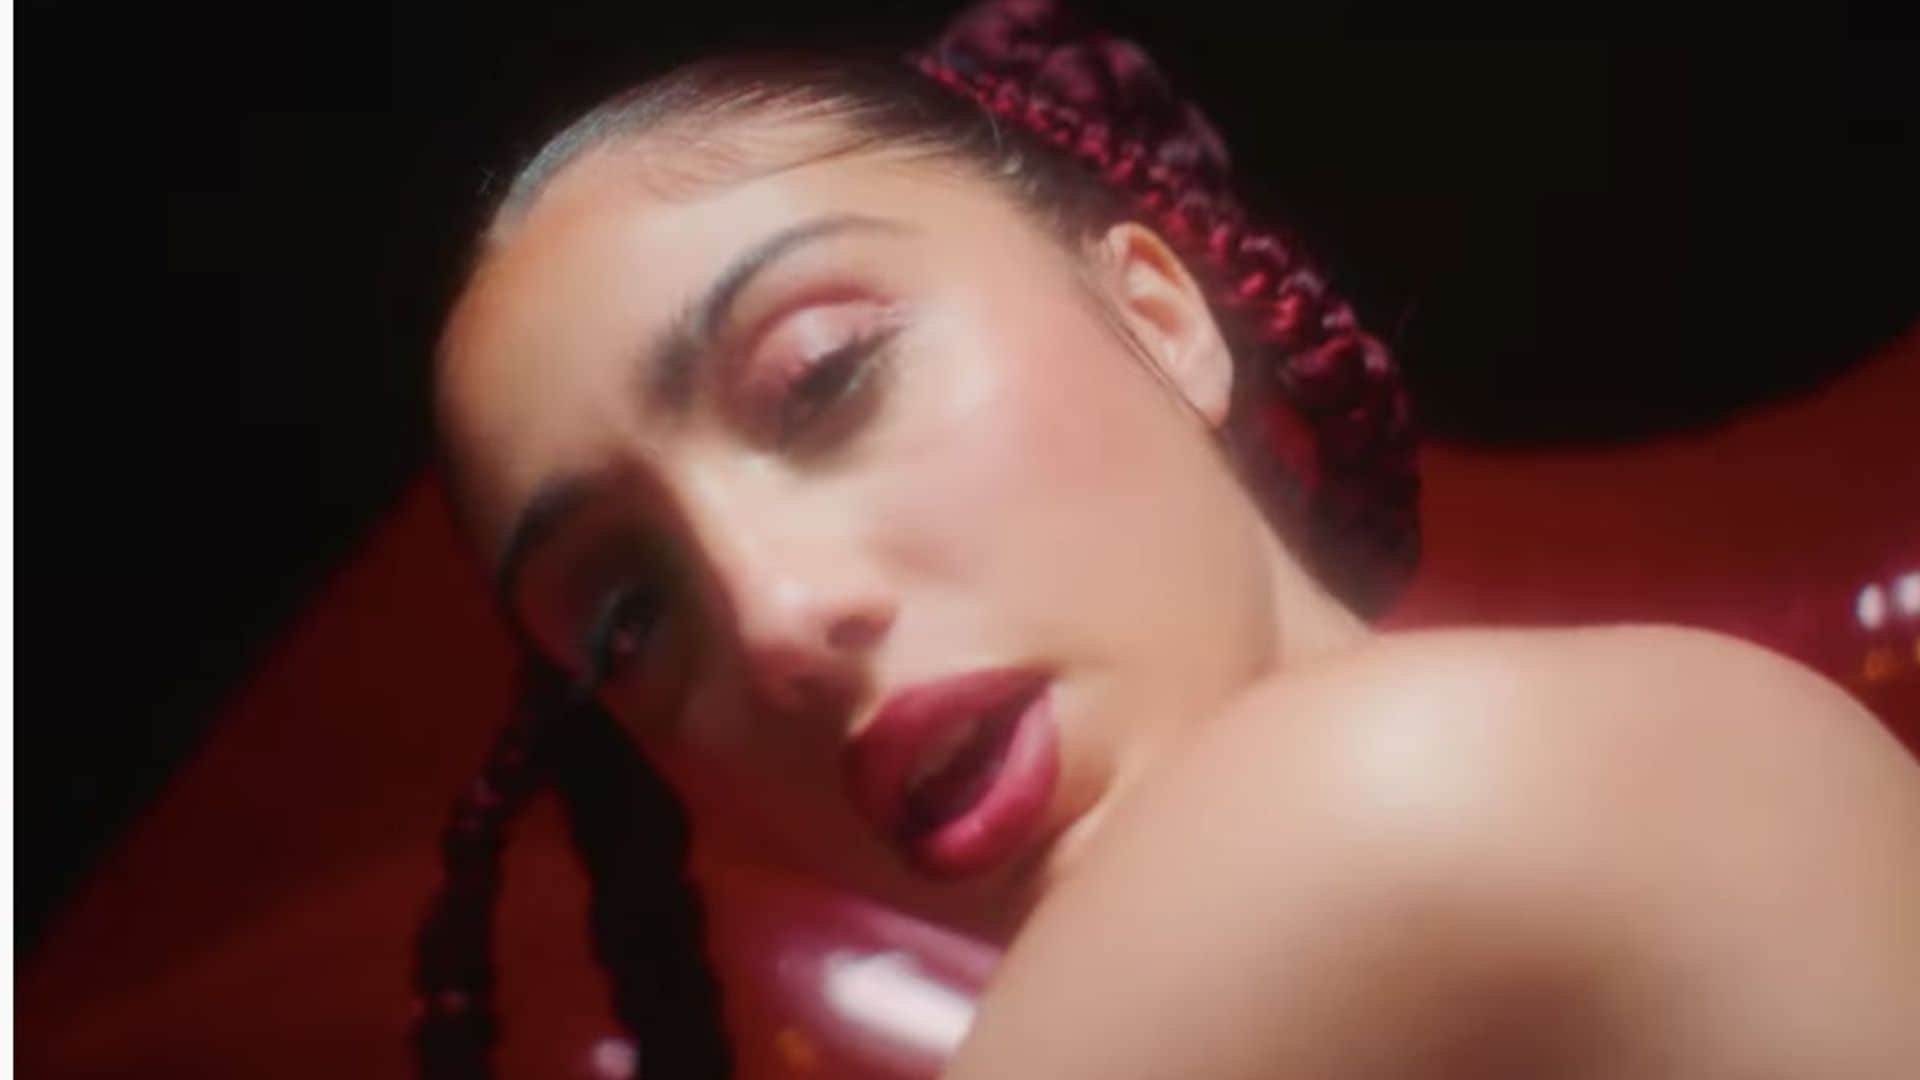 Lourdes Leon showcases her voice and colorful energy with new song, “Love Me Still”